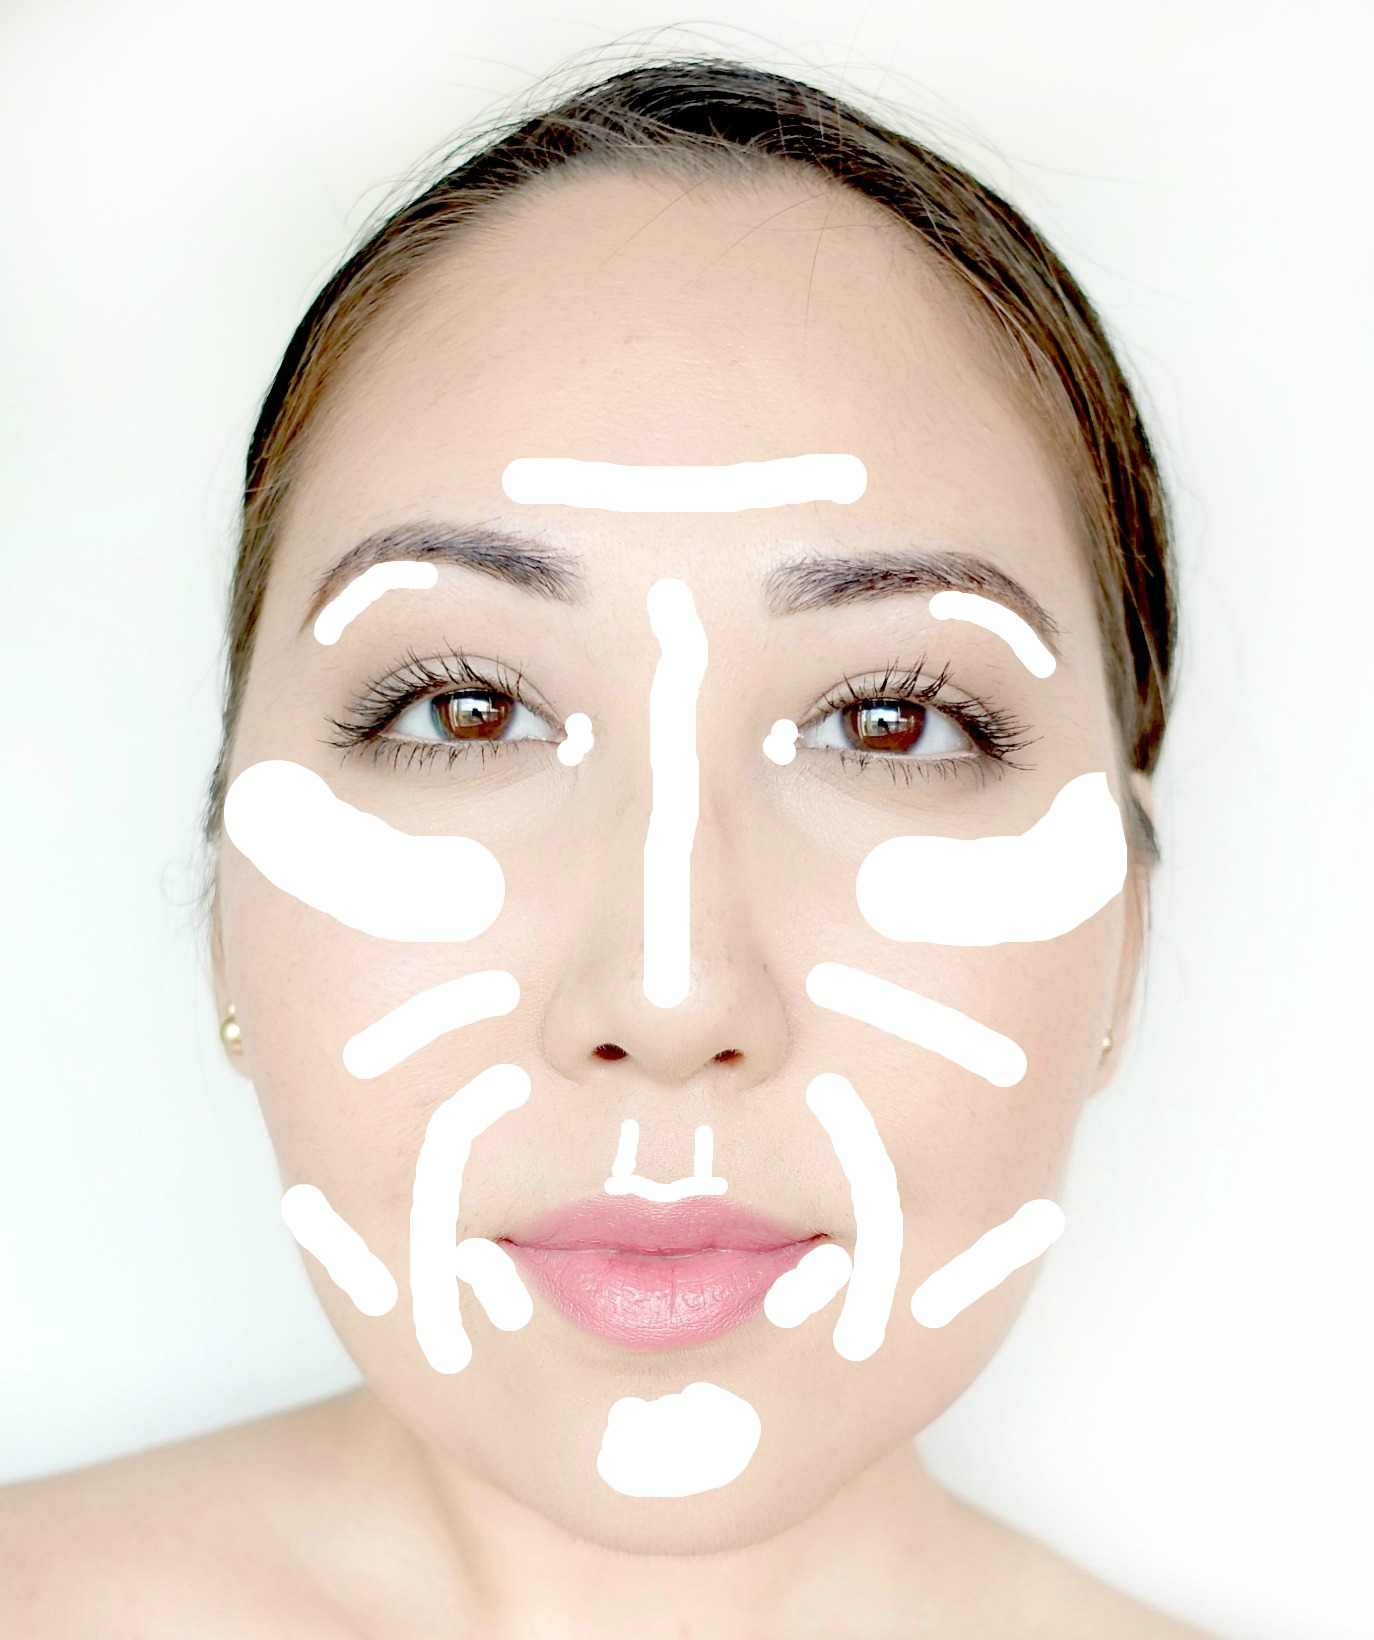 How to Highlight Your Face the RIGHT Way (+ the wrong way)